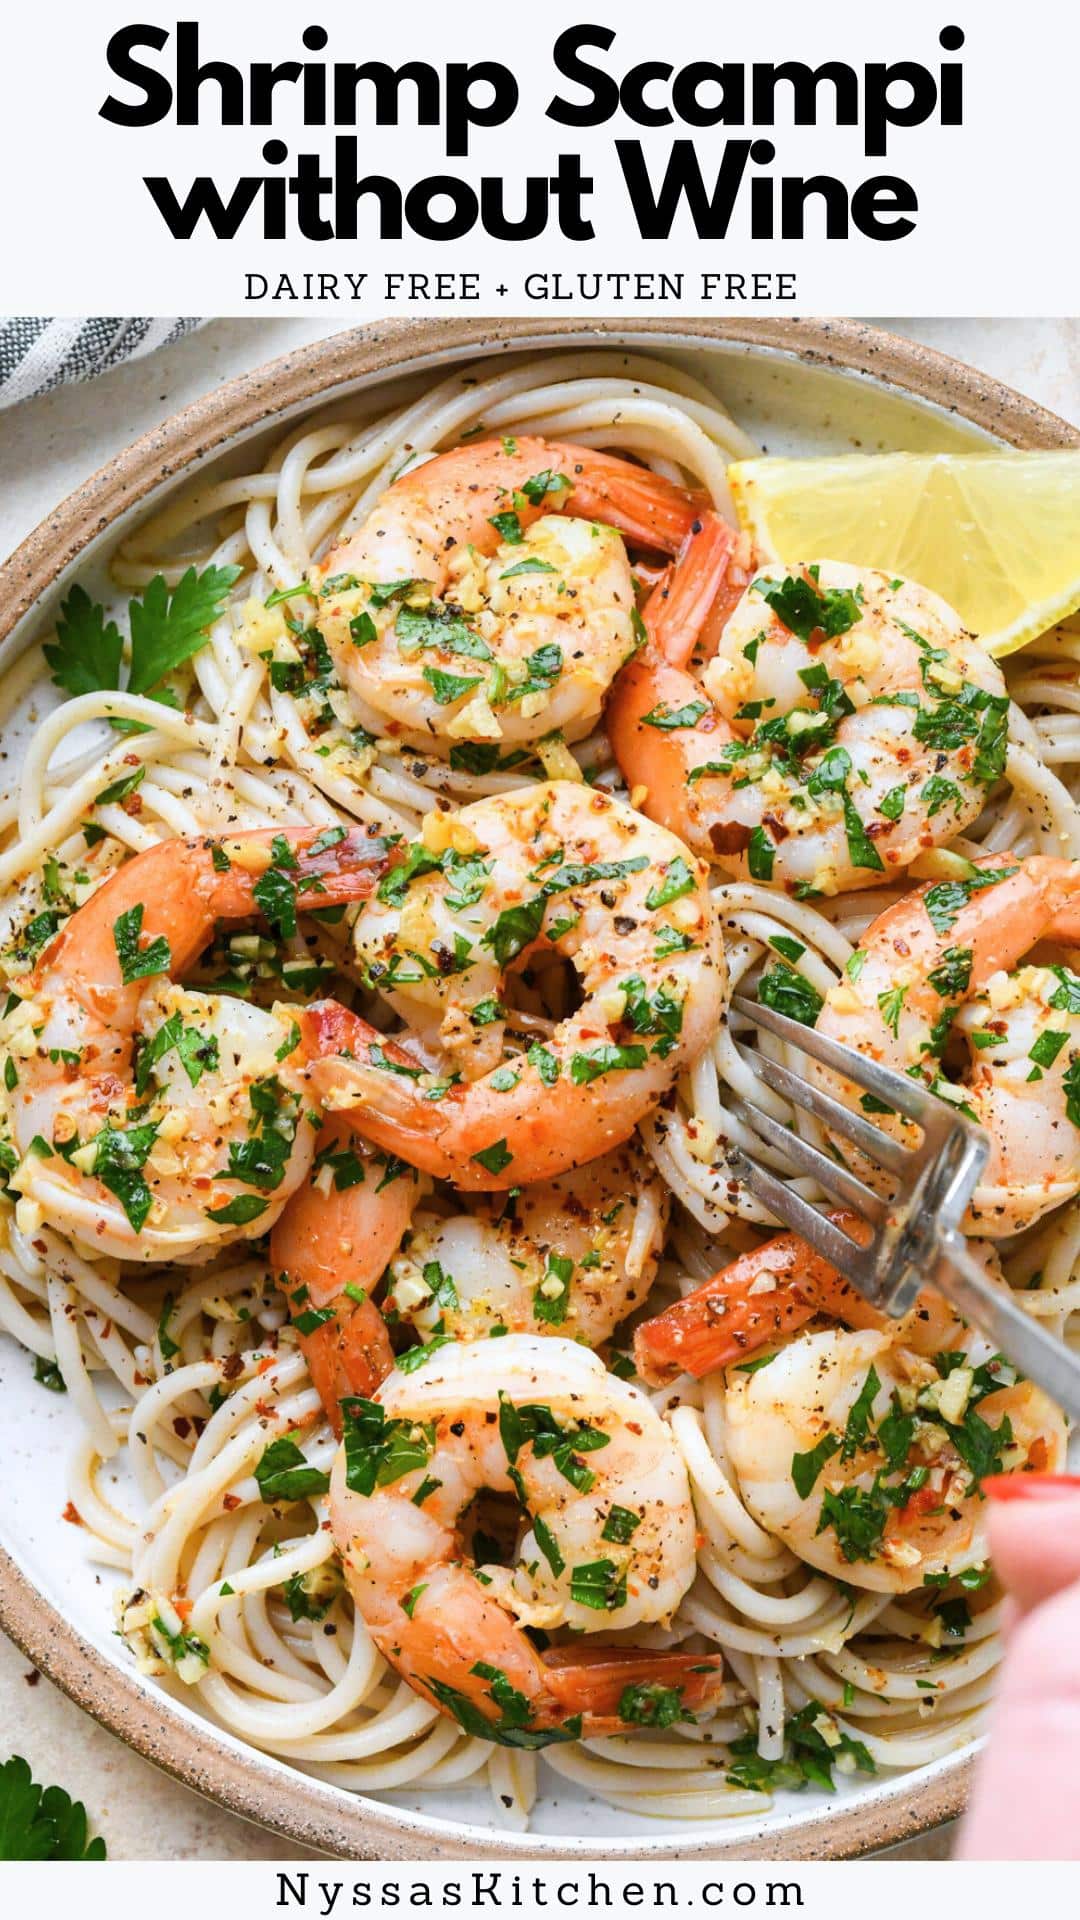 This recipe for shrimp scampi without wine is so easy to make from scratch! It is ready in just 20 minutes from start to finish. Cooked on the stovetop and made with tail on shrimp, olive oil, garlic, (optional) chili flakes, parsley, lemon juice, and broth. It pairs perfectly with your favorite pasta but is also delicious served on its own with a side dish or as an appetizer. A healthy recipe that is gluten free, dairy free, and bursting with flavor!